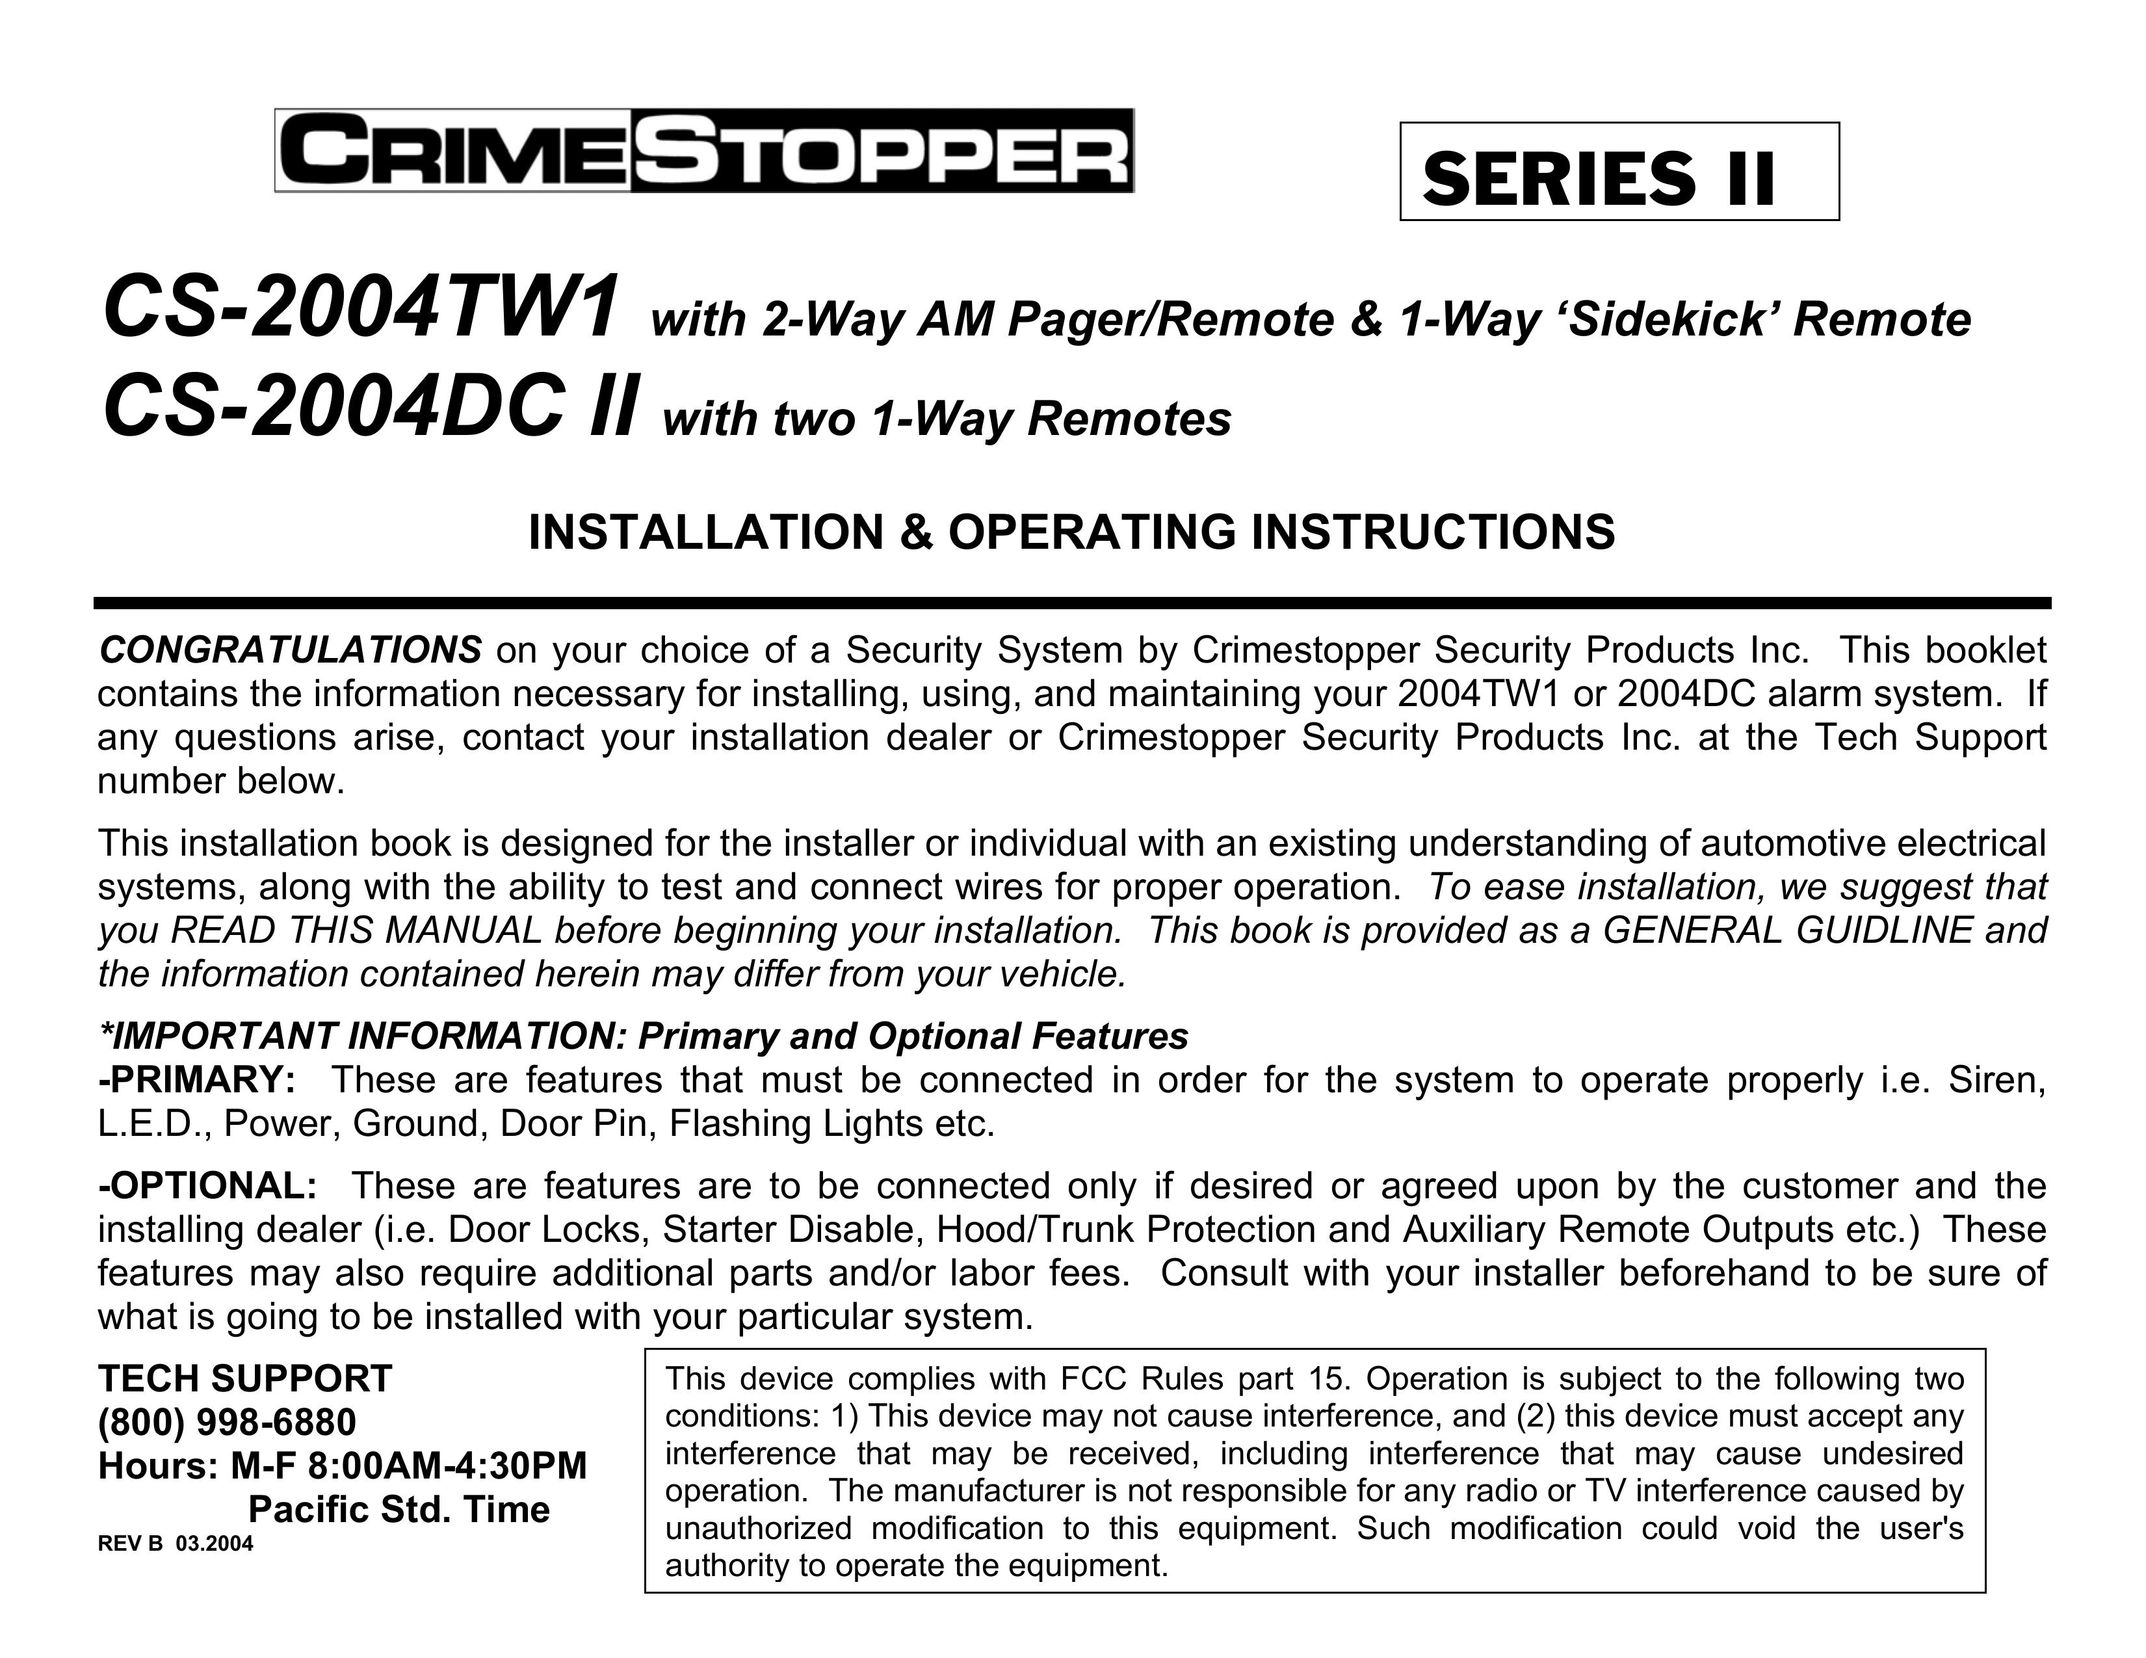 Crimestopper Security Products CS-2004DC II Home Security System User Manual